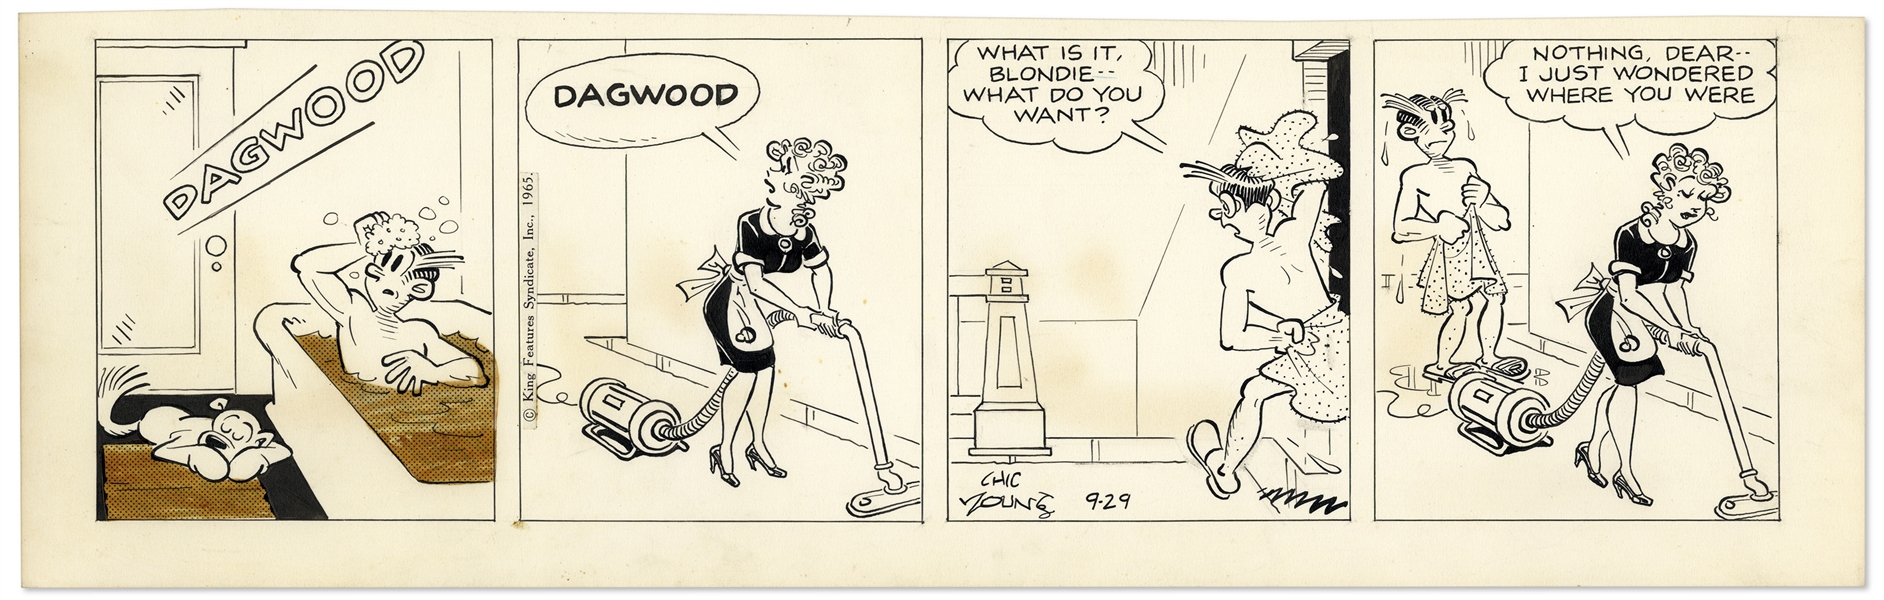 2 Chic Young Hand-Drawn ''Blondie'' Comic Strips From 1965 & 1966 -- With Chic Young's Original Preliminary Artwork for One